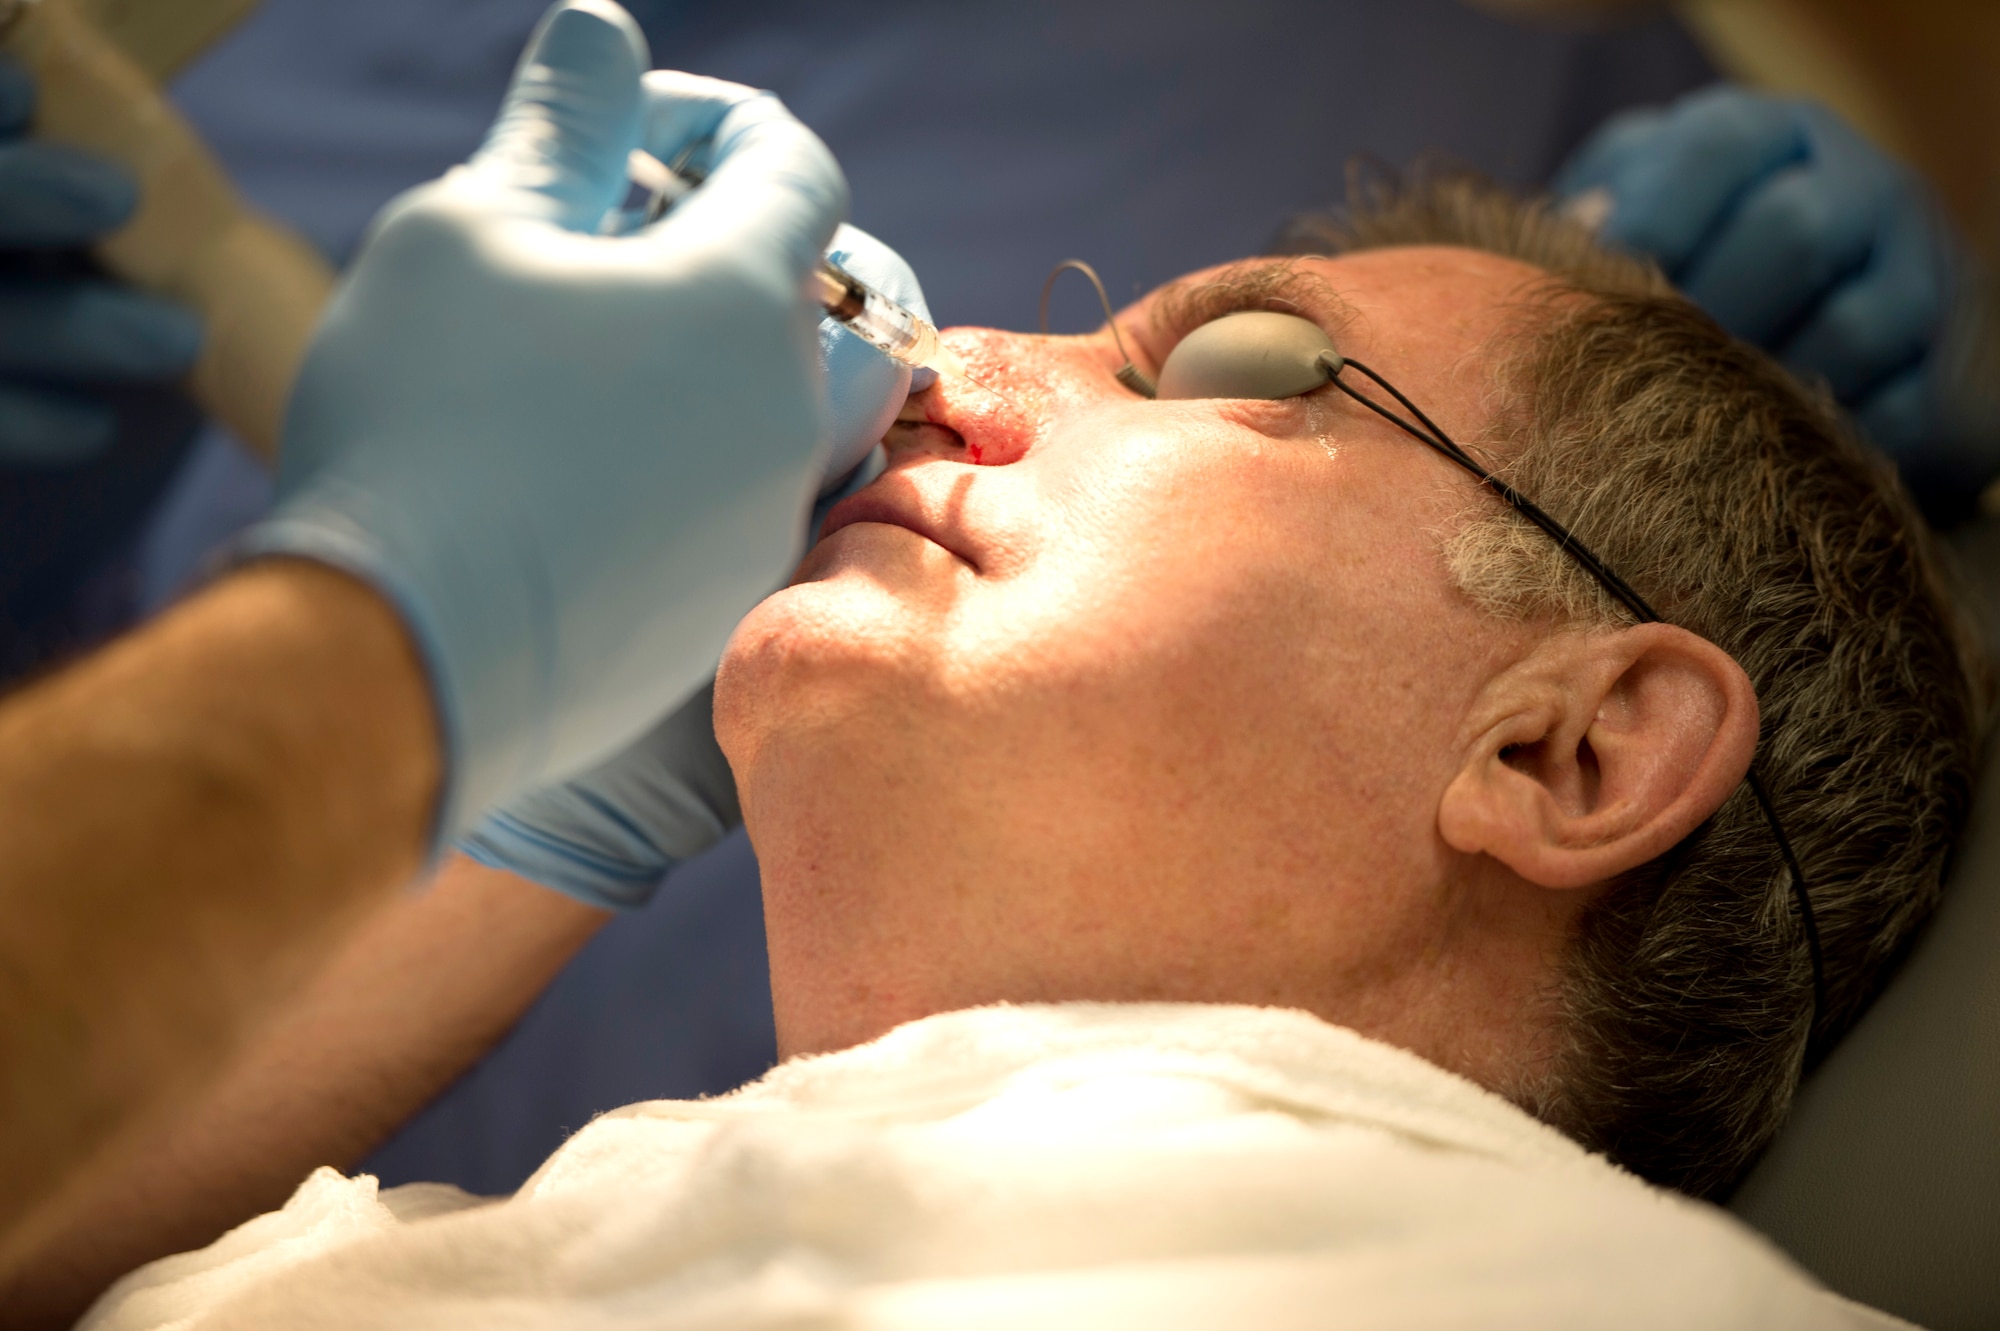 Maj. (Dr.) Thomas Beachkofsky, dermatology element leader assigned to the 6th Medical Group, injects lidocaine into the nose of a dermatology patient, to numb the surrounding area during a laser treatment at MacDill Air Force Base, Fla., March 9, 2018.